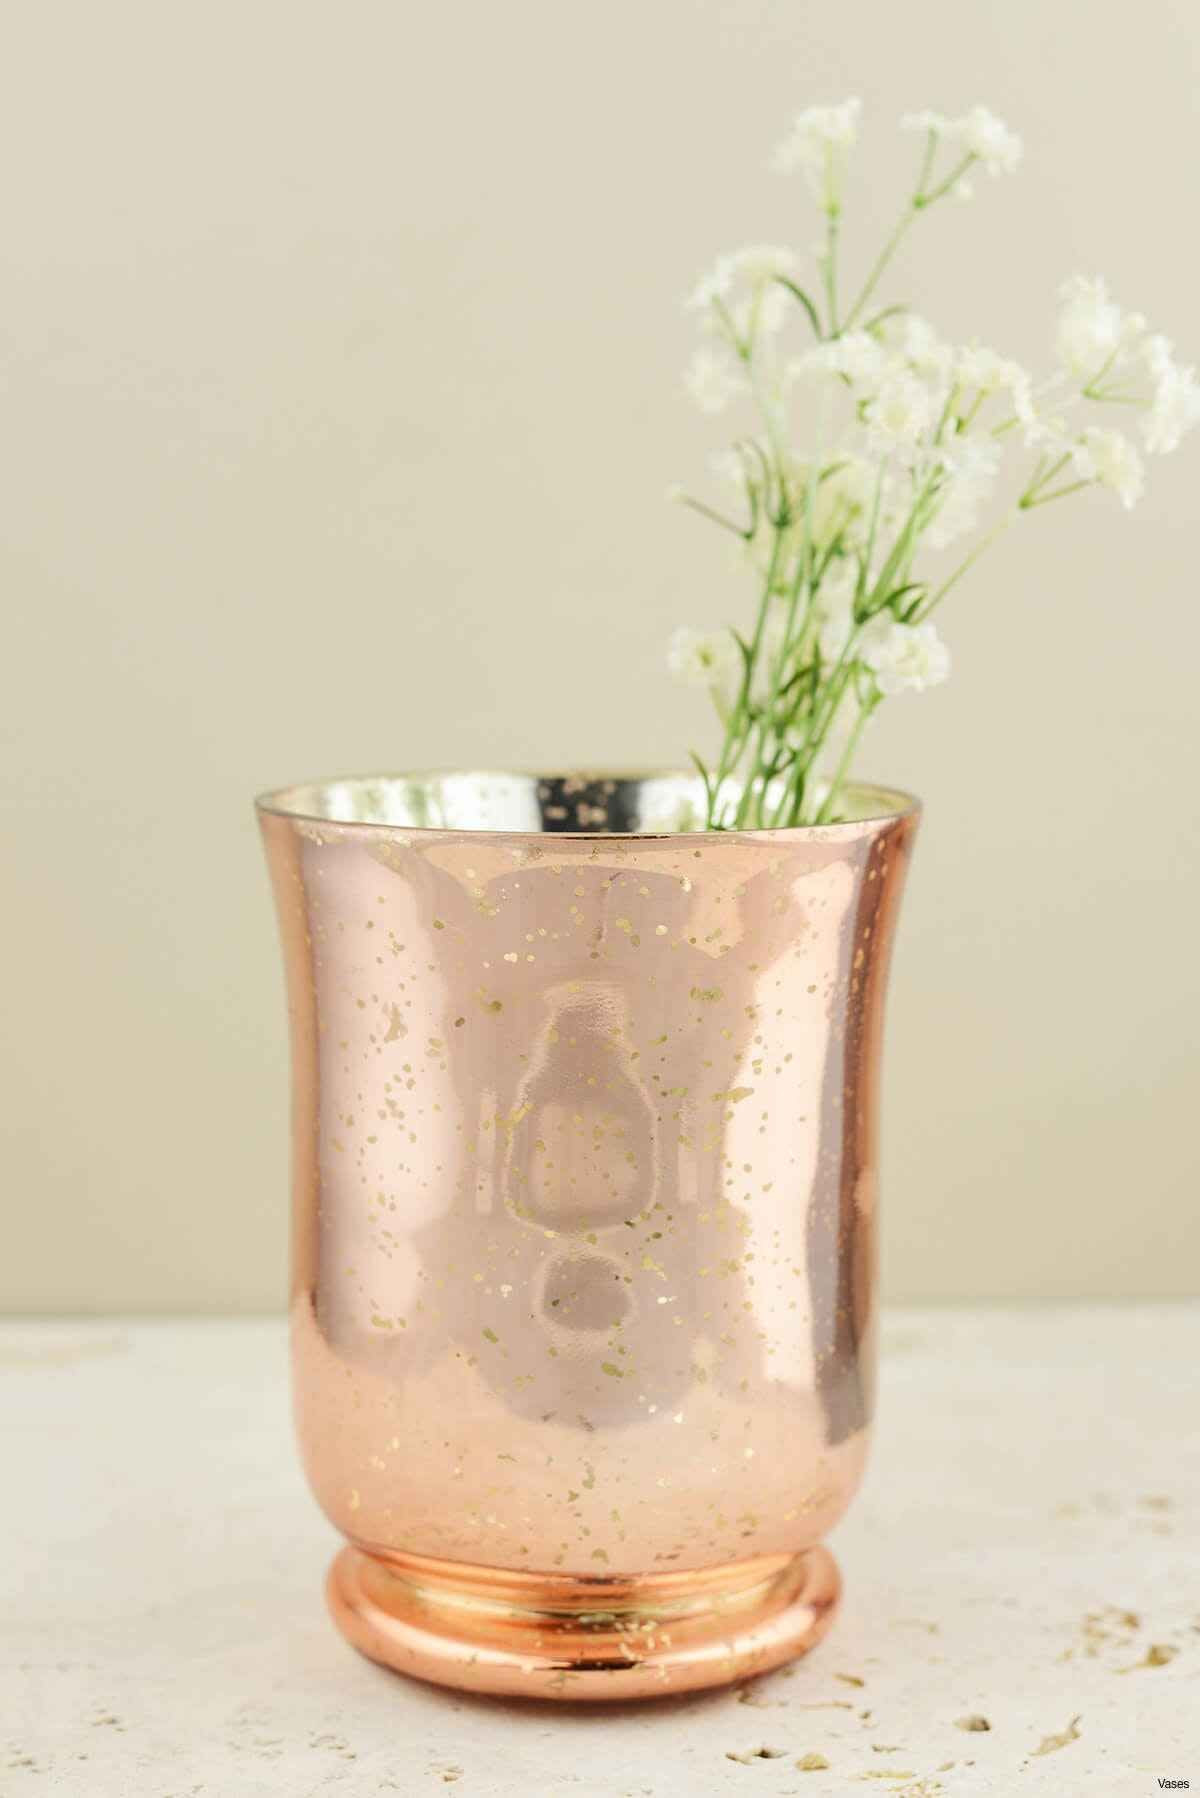 12 Best Rose Colored Glass Vase 2024 free download rose colored glass vase of 34 gold mercury glass vases the weekly world intended for gold mercury glass vases awesome 50 fresh collection candle holders rose gold of gold mercury glass vases